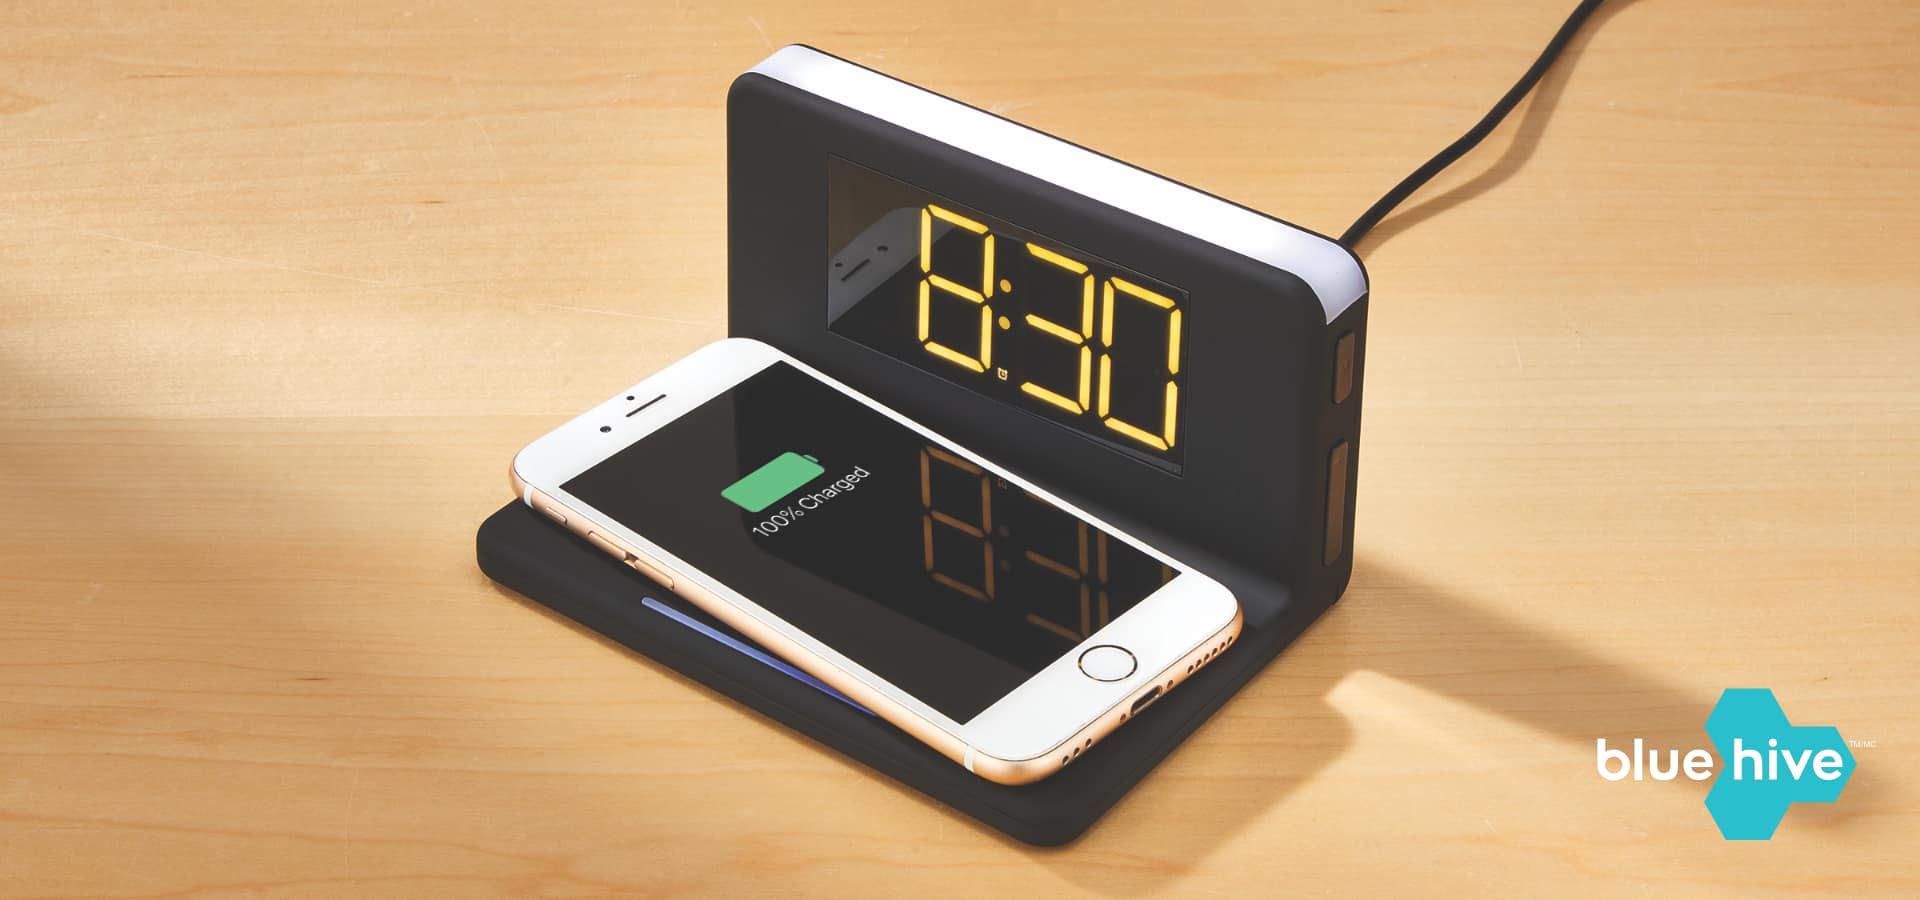 A black Bluehive Wireless Charger with Alarm Clock charging a white mobile phone.